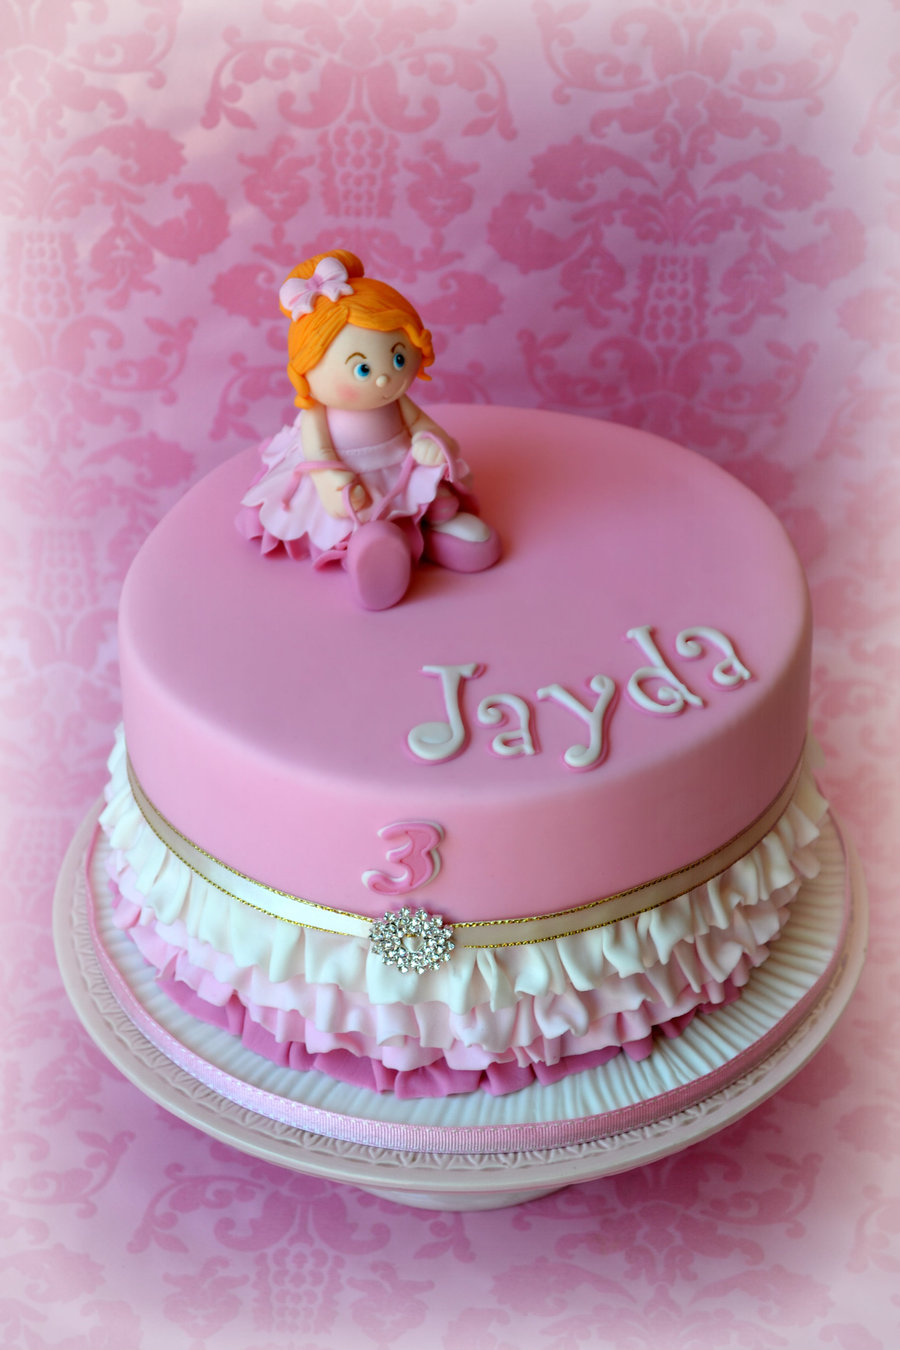 Birthday Cake For A Little Girl Who Loves To Dance The Only Request I ...